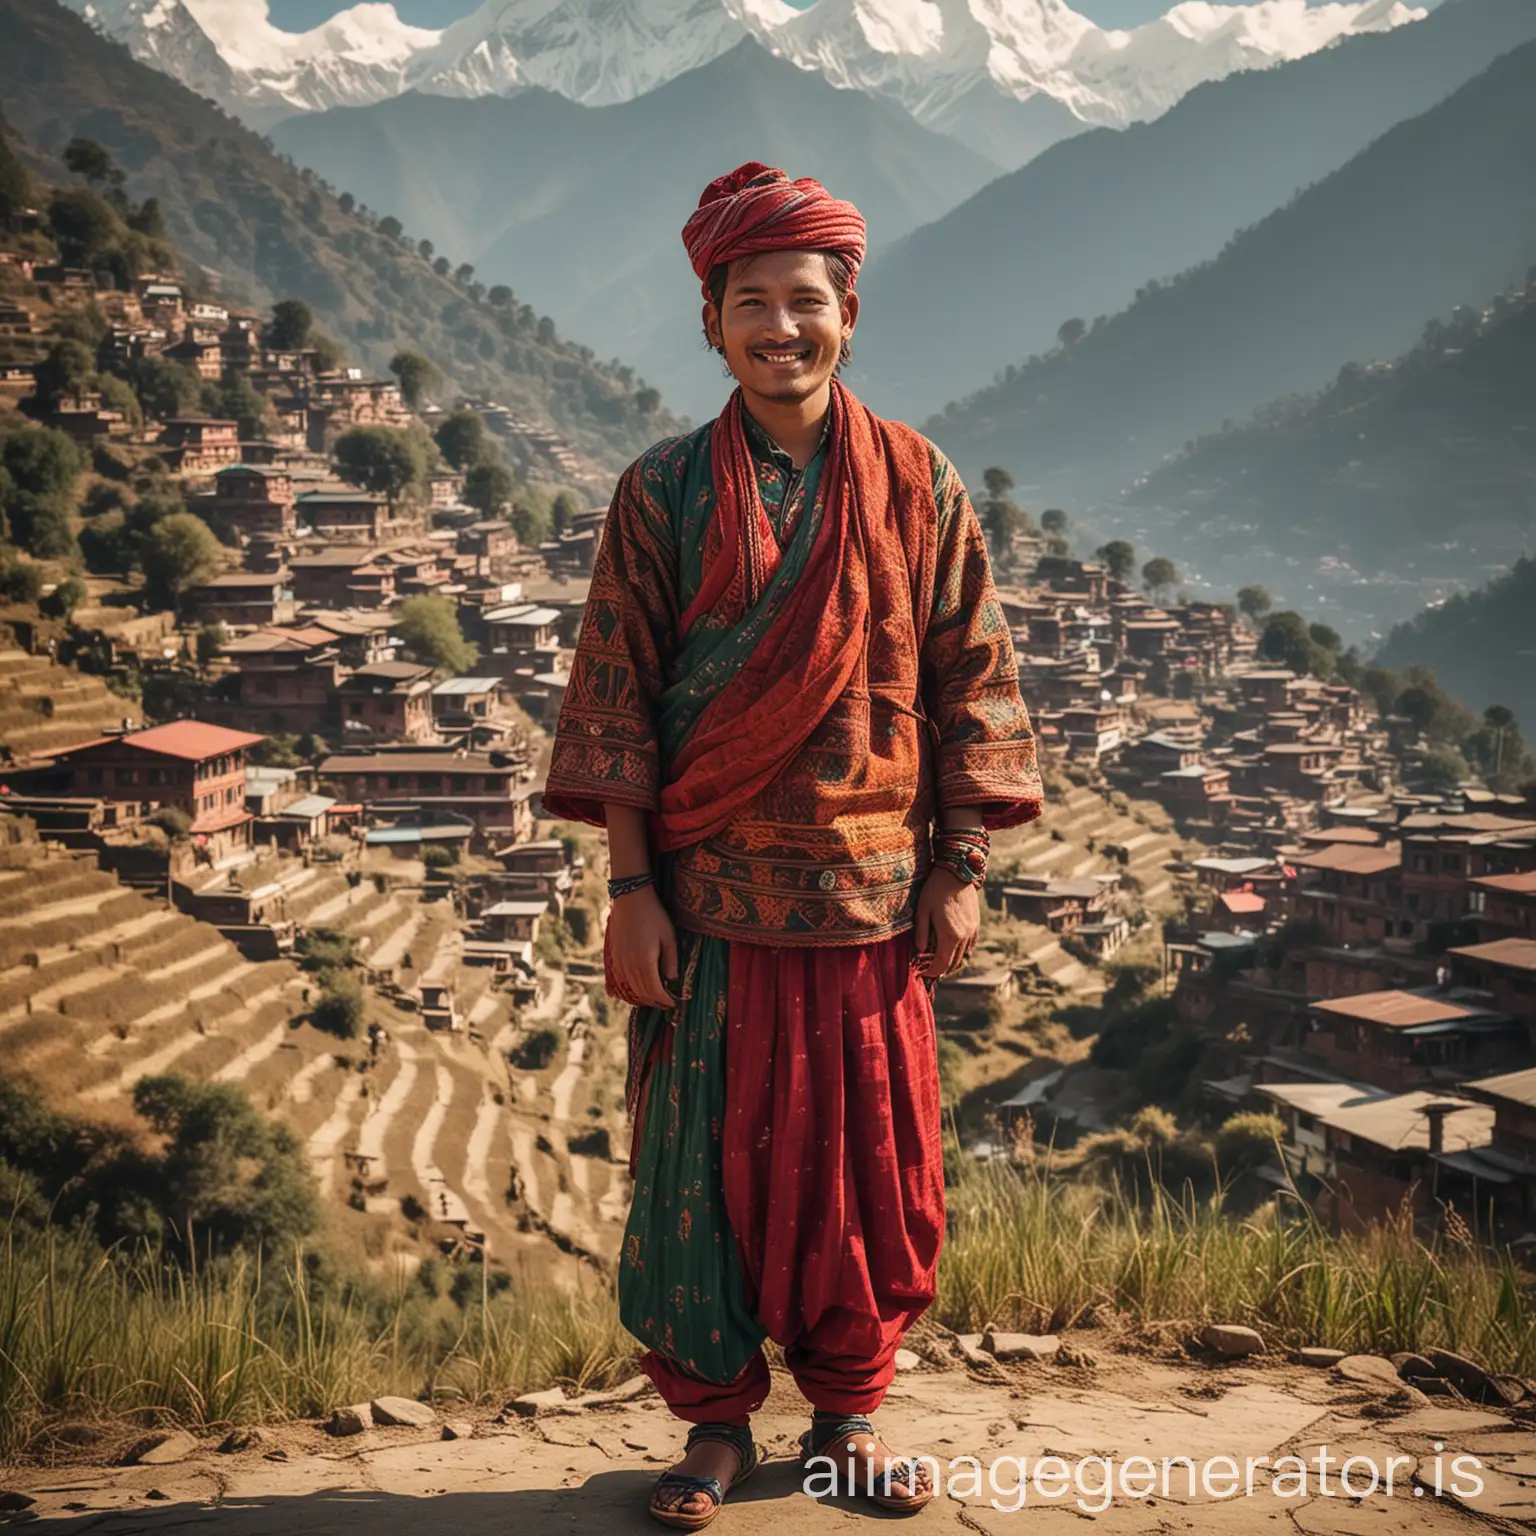 Capture a full-body photo of a Nepali individual standing against a picturesque backdrop. The person should be dressed in traditional Nepali attire, with vibrant colors and intricate patterns. Ensure the background highlights the natural beauty of Nepal, such as the Himalayas, terraced fields, or historic architecture. The person should be centered, with a confident and relaxed posture, smiling naturally."